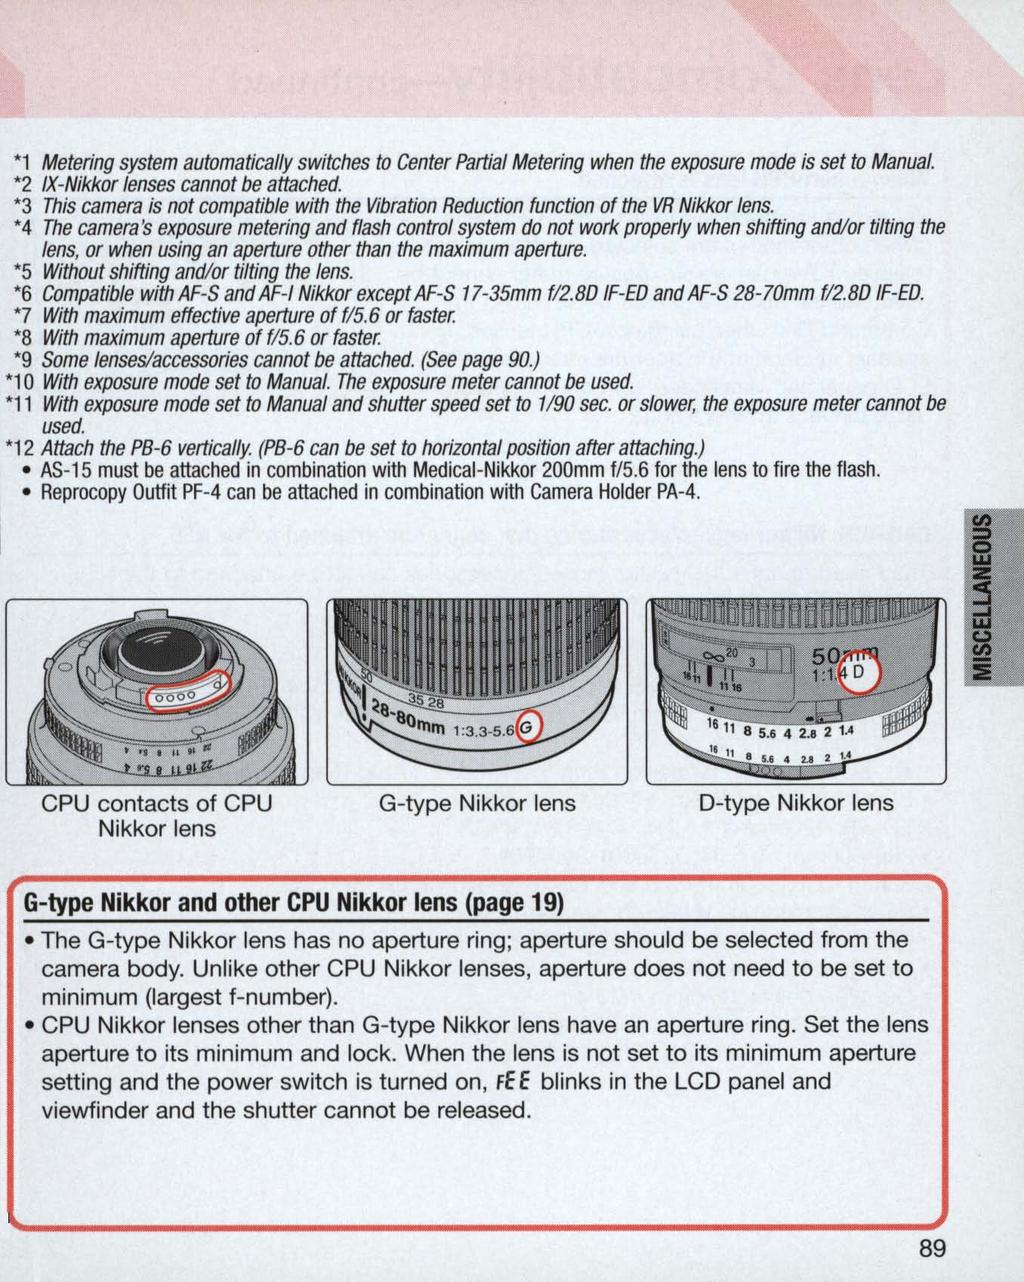 '1 Metering system automatically switches to Center Partial Metering when the exposure mode is set to Manual. '2 IX-Nikkor lenses cannot be attached.